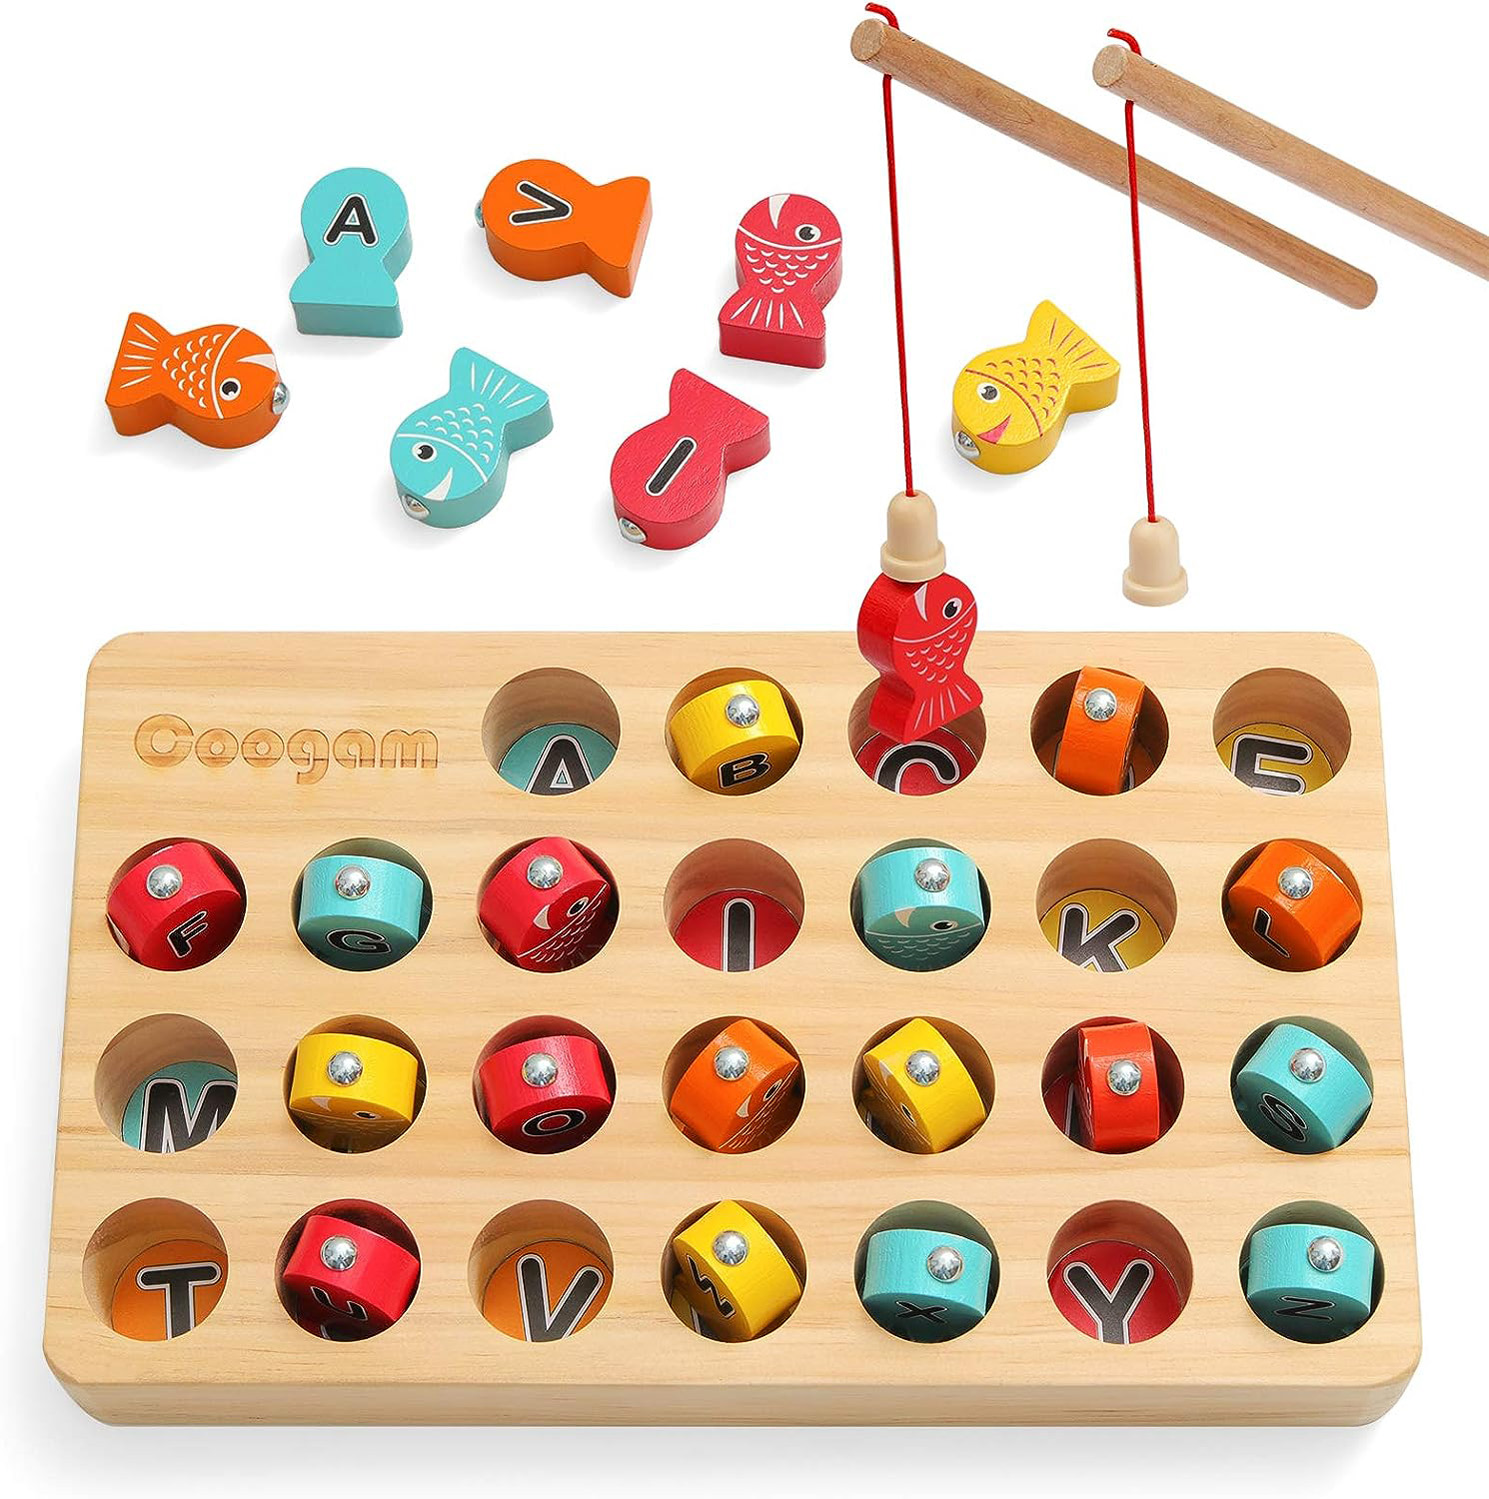 Coogam Wooden Magnetic Fishing Game, Fine Motor Skill Toy ABC Alphabet Color Sorting Puzzle